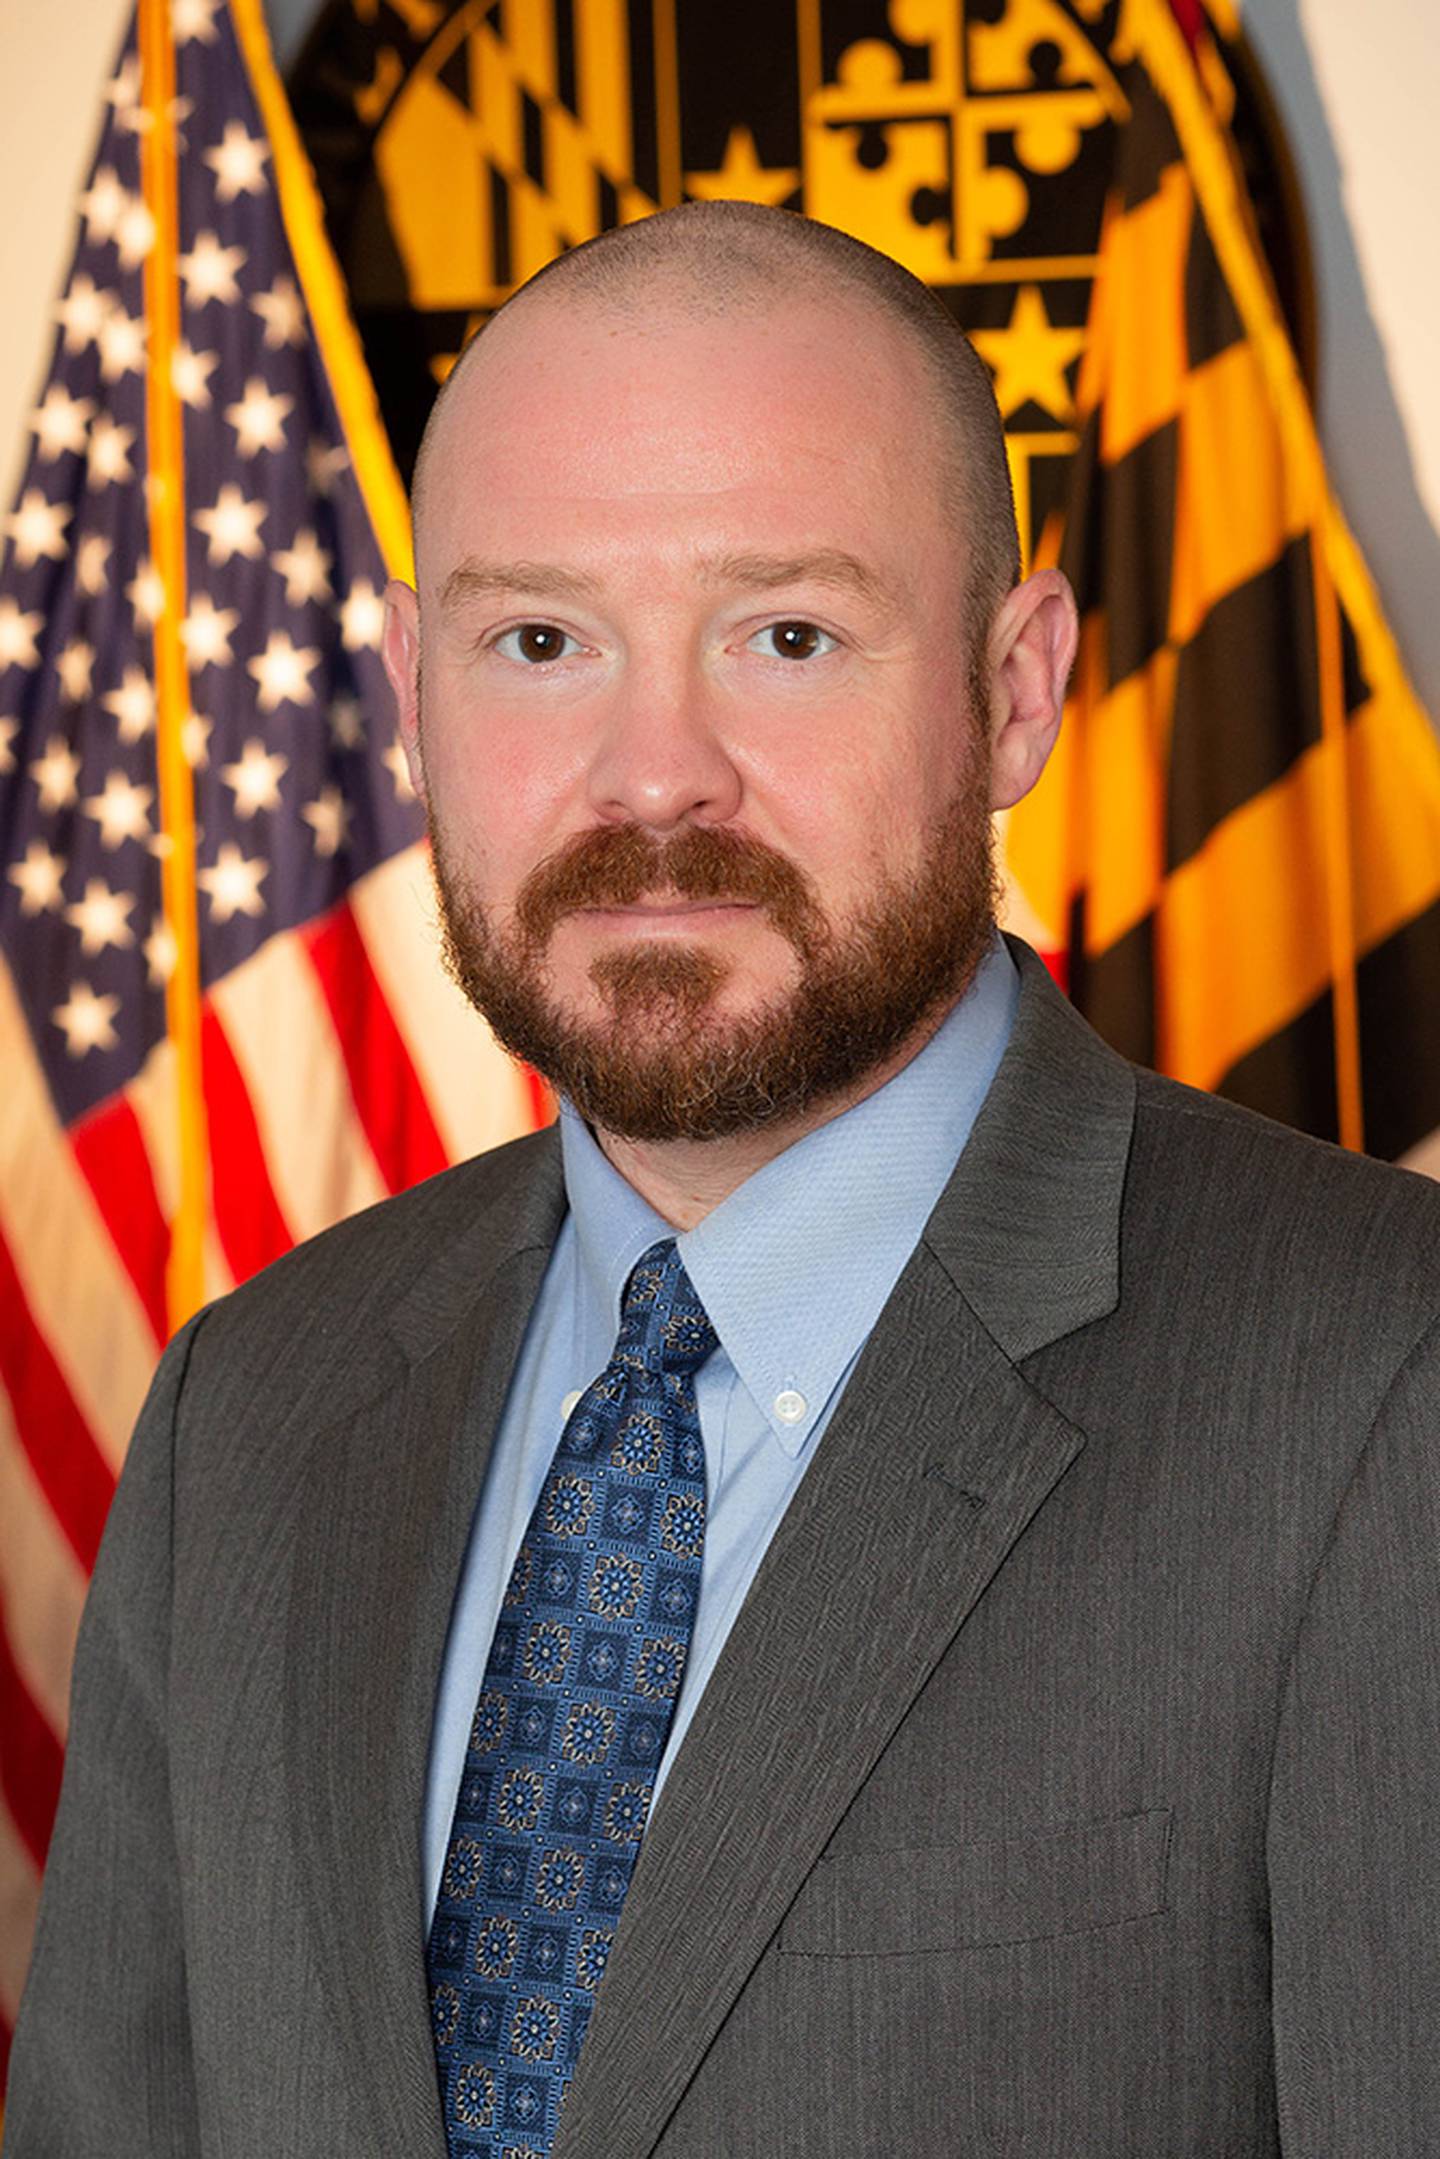 Patrick H. Murray, chief of staff for Baltimore County Executive Johnny Olszewski Jr., has resigned from his position and will be replaced Sept. 15.